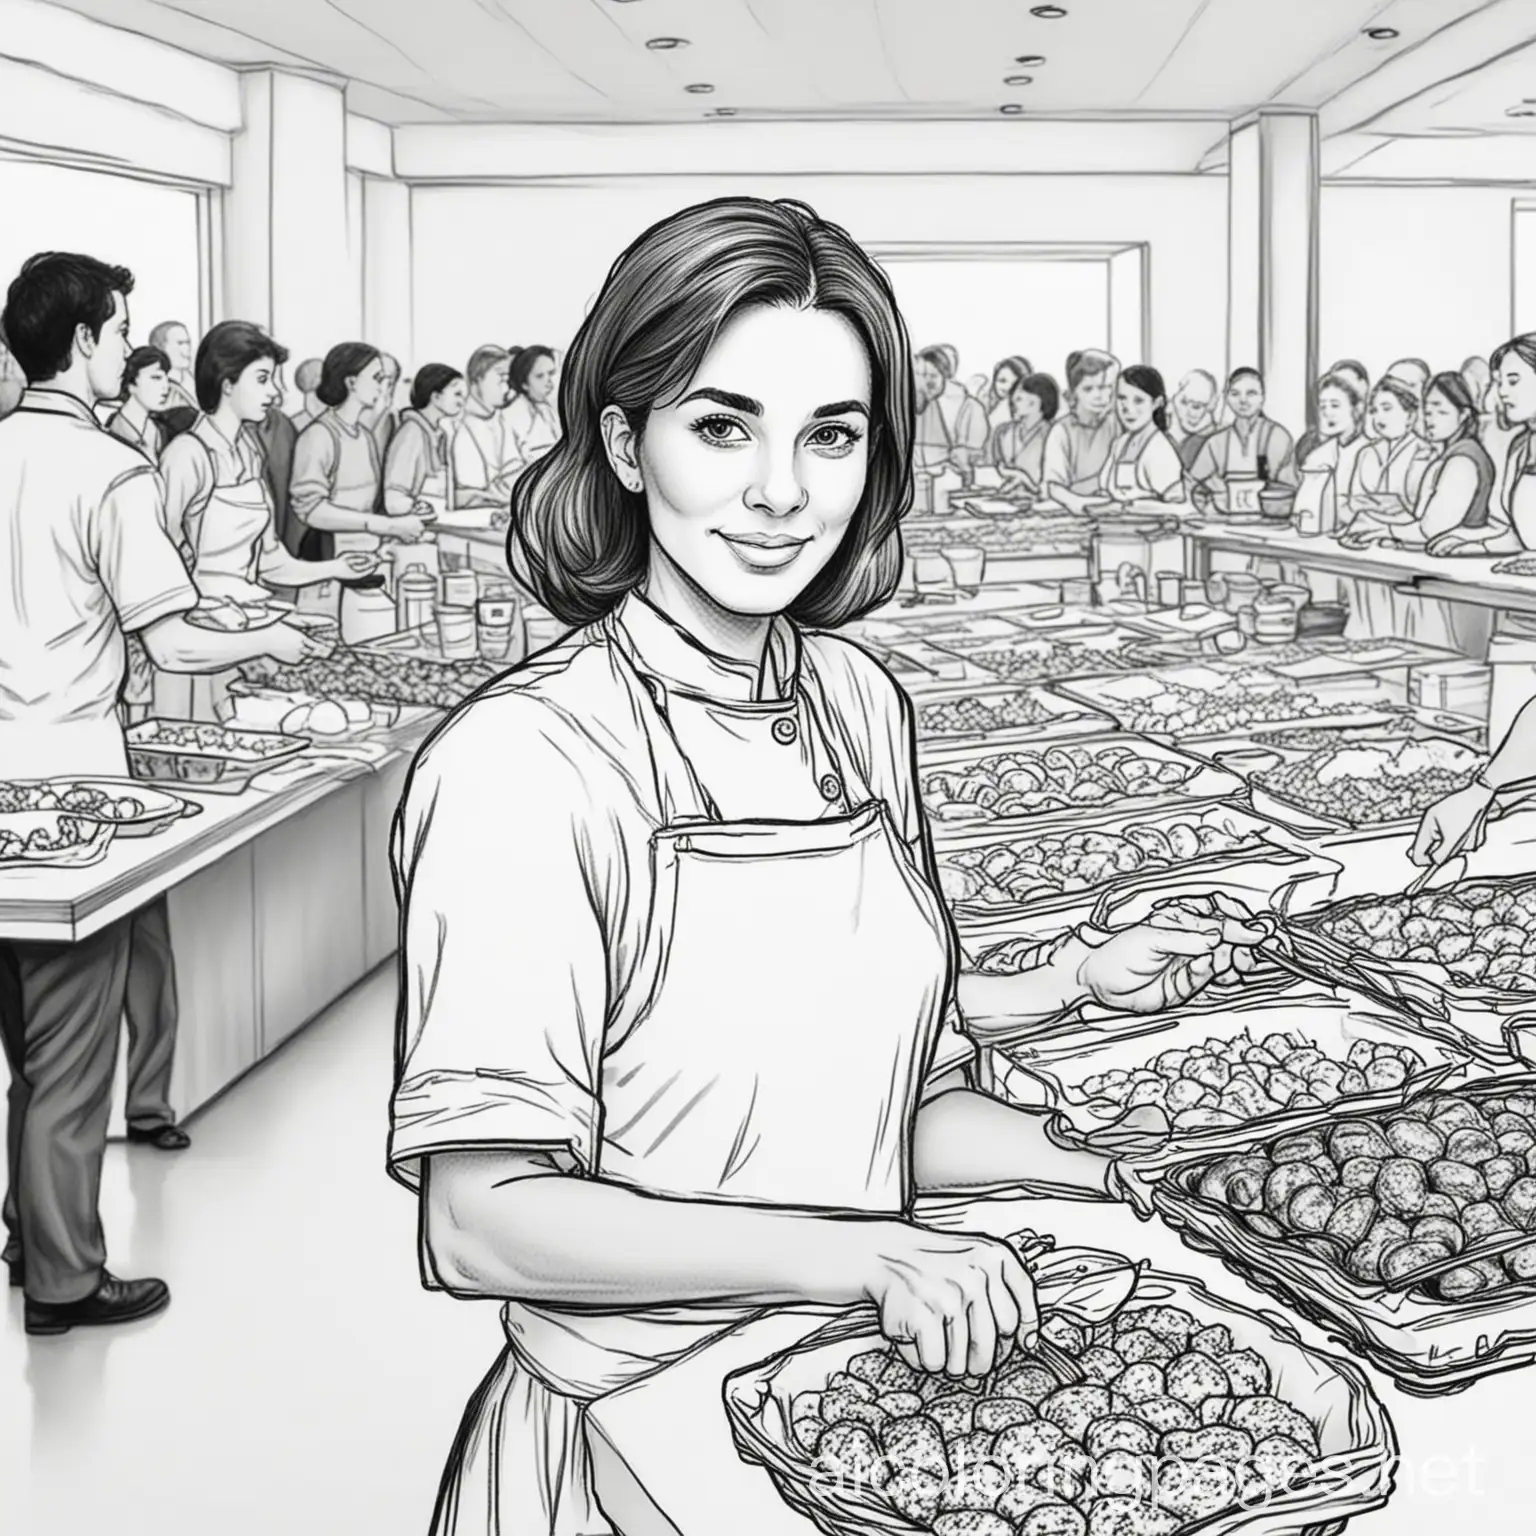 a woman serving food to disaster victims at a buffet line, Coloring Page, black and white, line art, white background, Simplicity, Ample White Space. The background of the coloring page is plain white to make it easy for young children to color within the lines. The outlines of all the subjects are easy to distinguish, making it simple for kids to color without too much difficulty